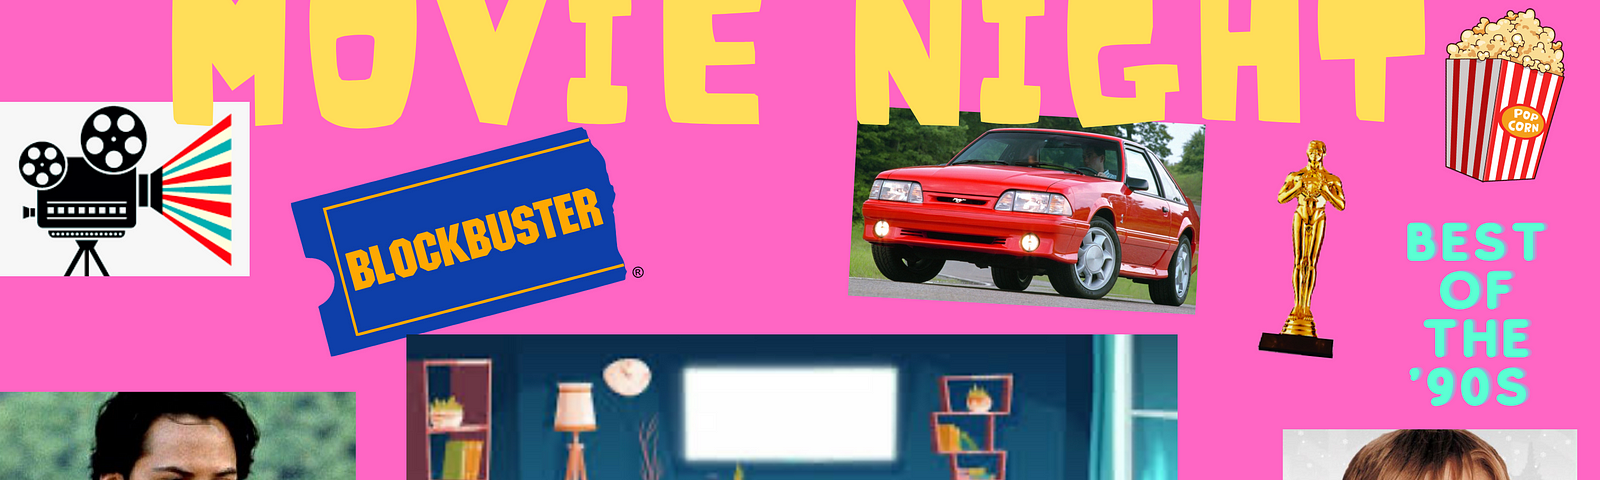 Nostalgic neon pink 1990s collage including images of: Keanu Reeves, Macaulay Culkin, Blockbuster video, popcorn, etc.